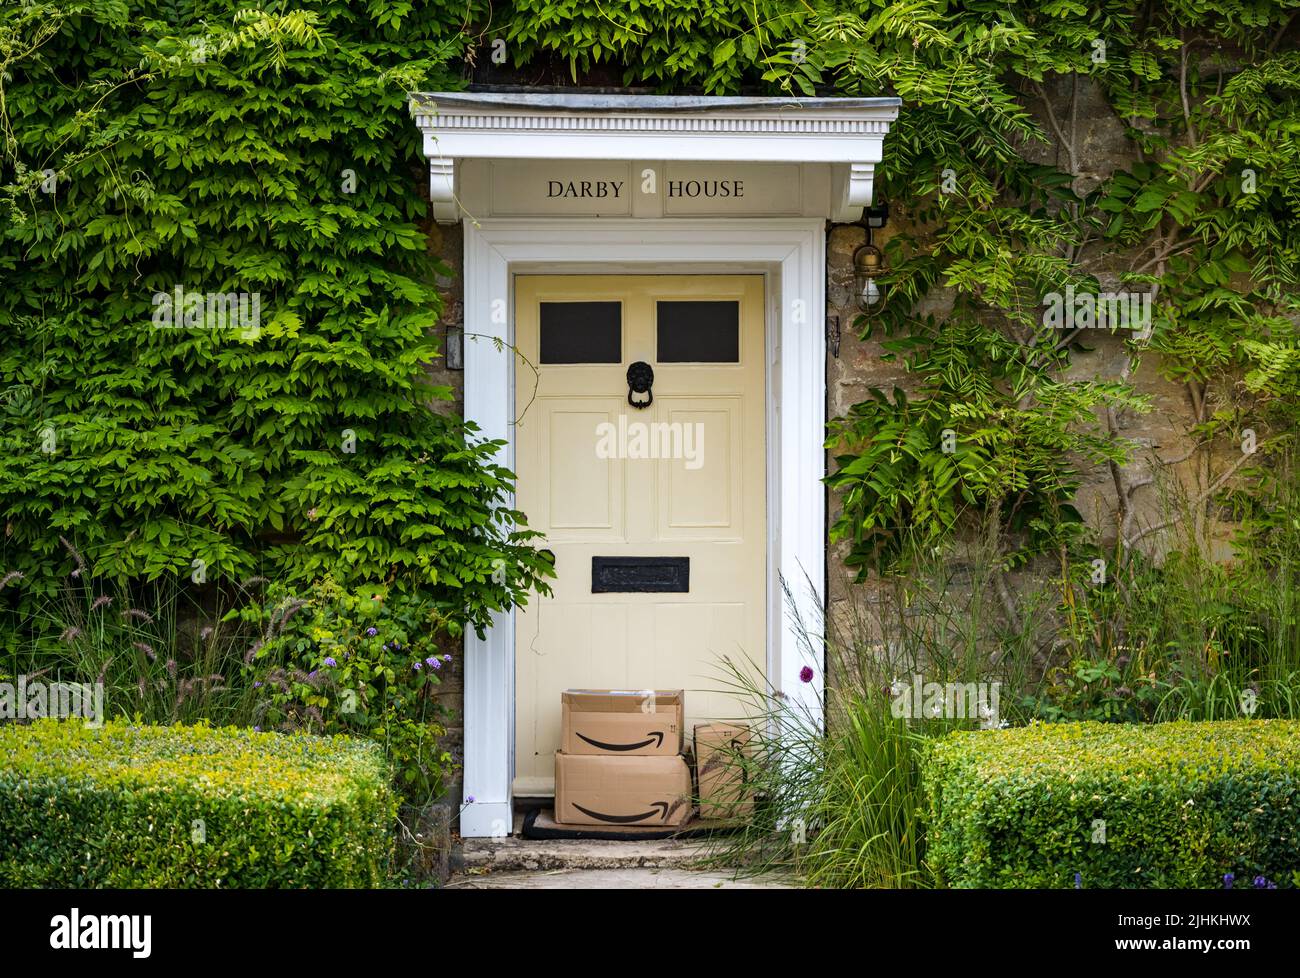 Amazon parcels left on a front doorstep of a period house, Dorset, England, UK Stock Photo